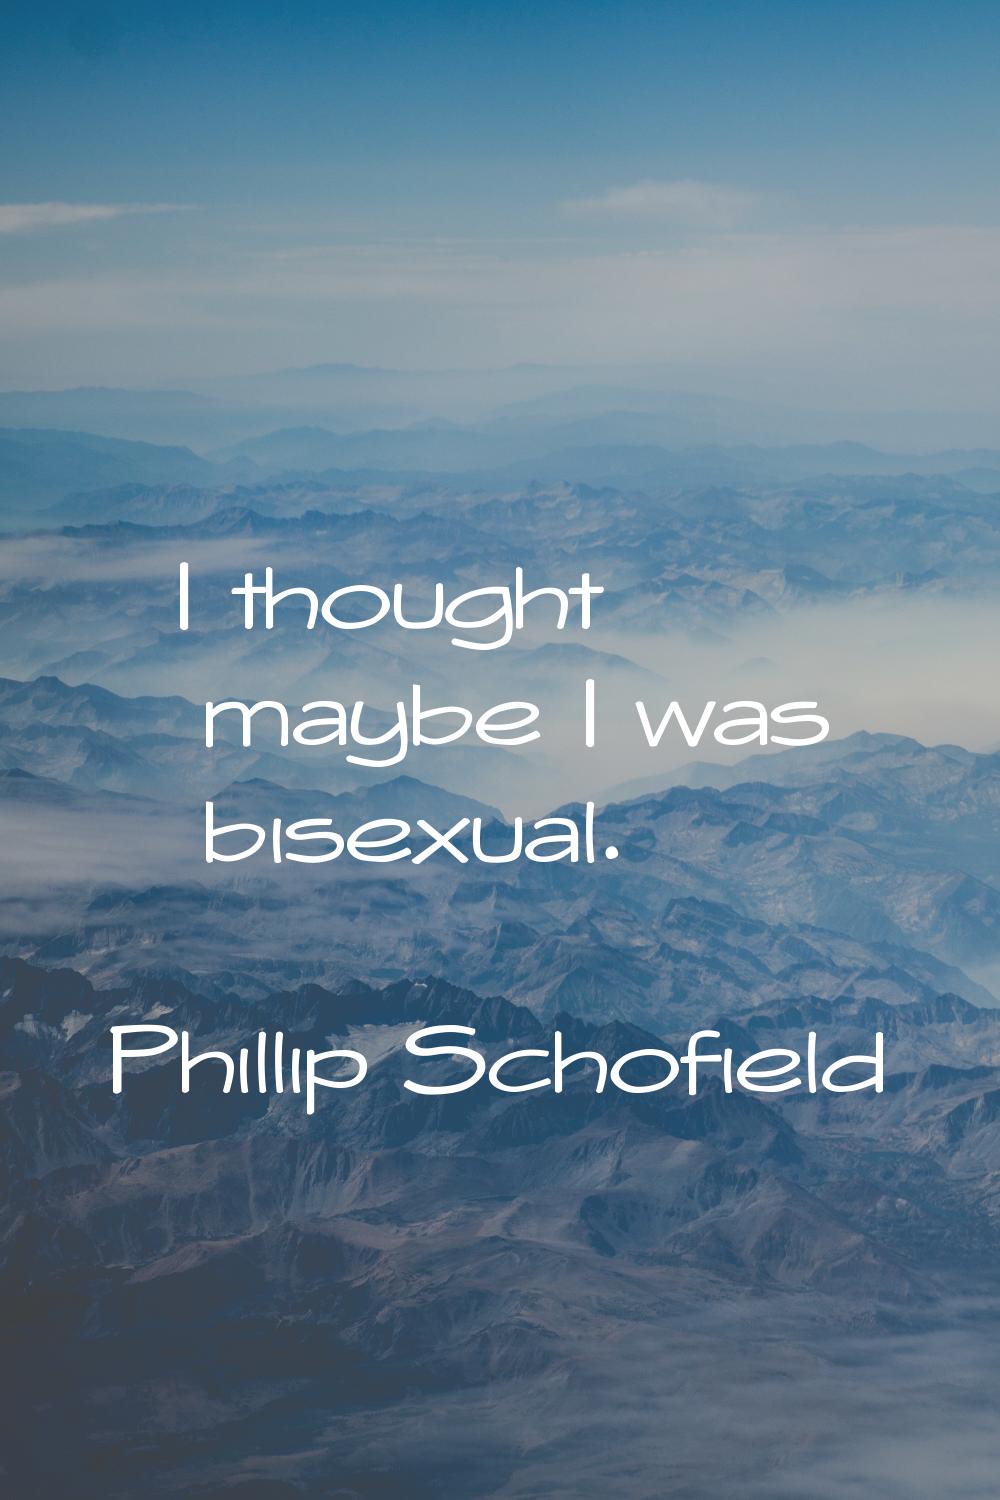 I thought maybe I was bisexual.